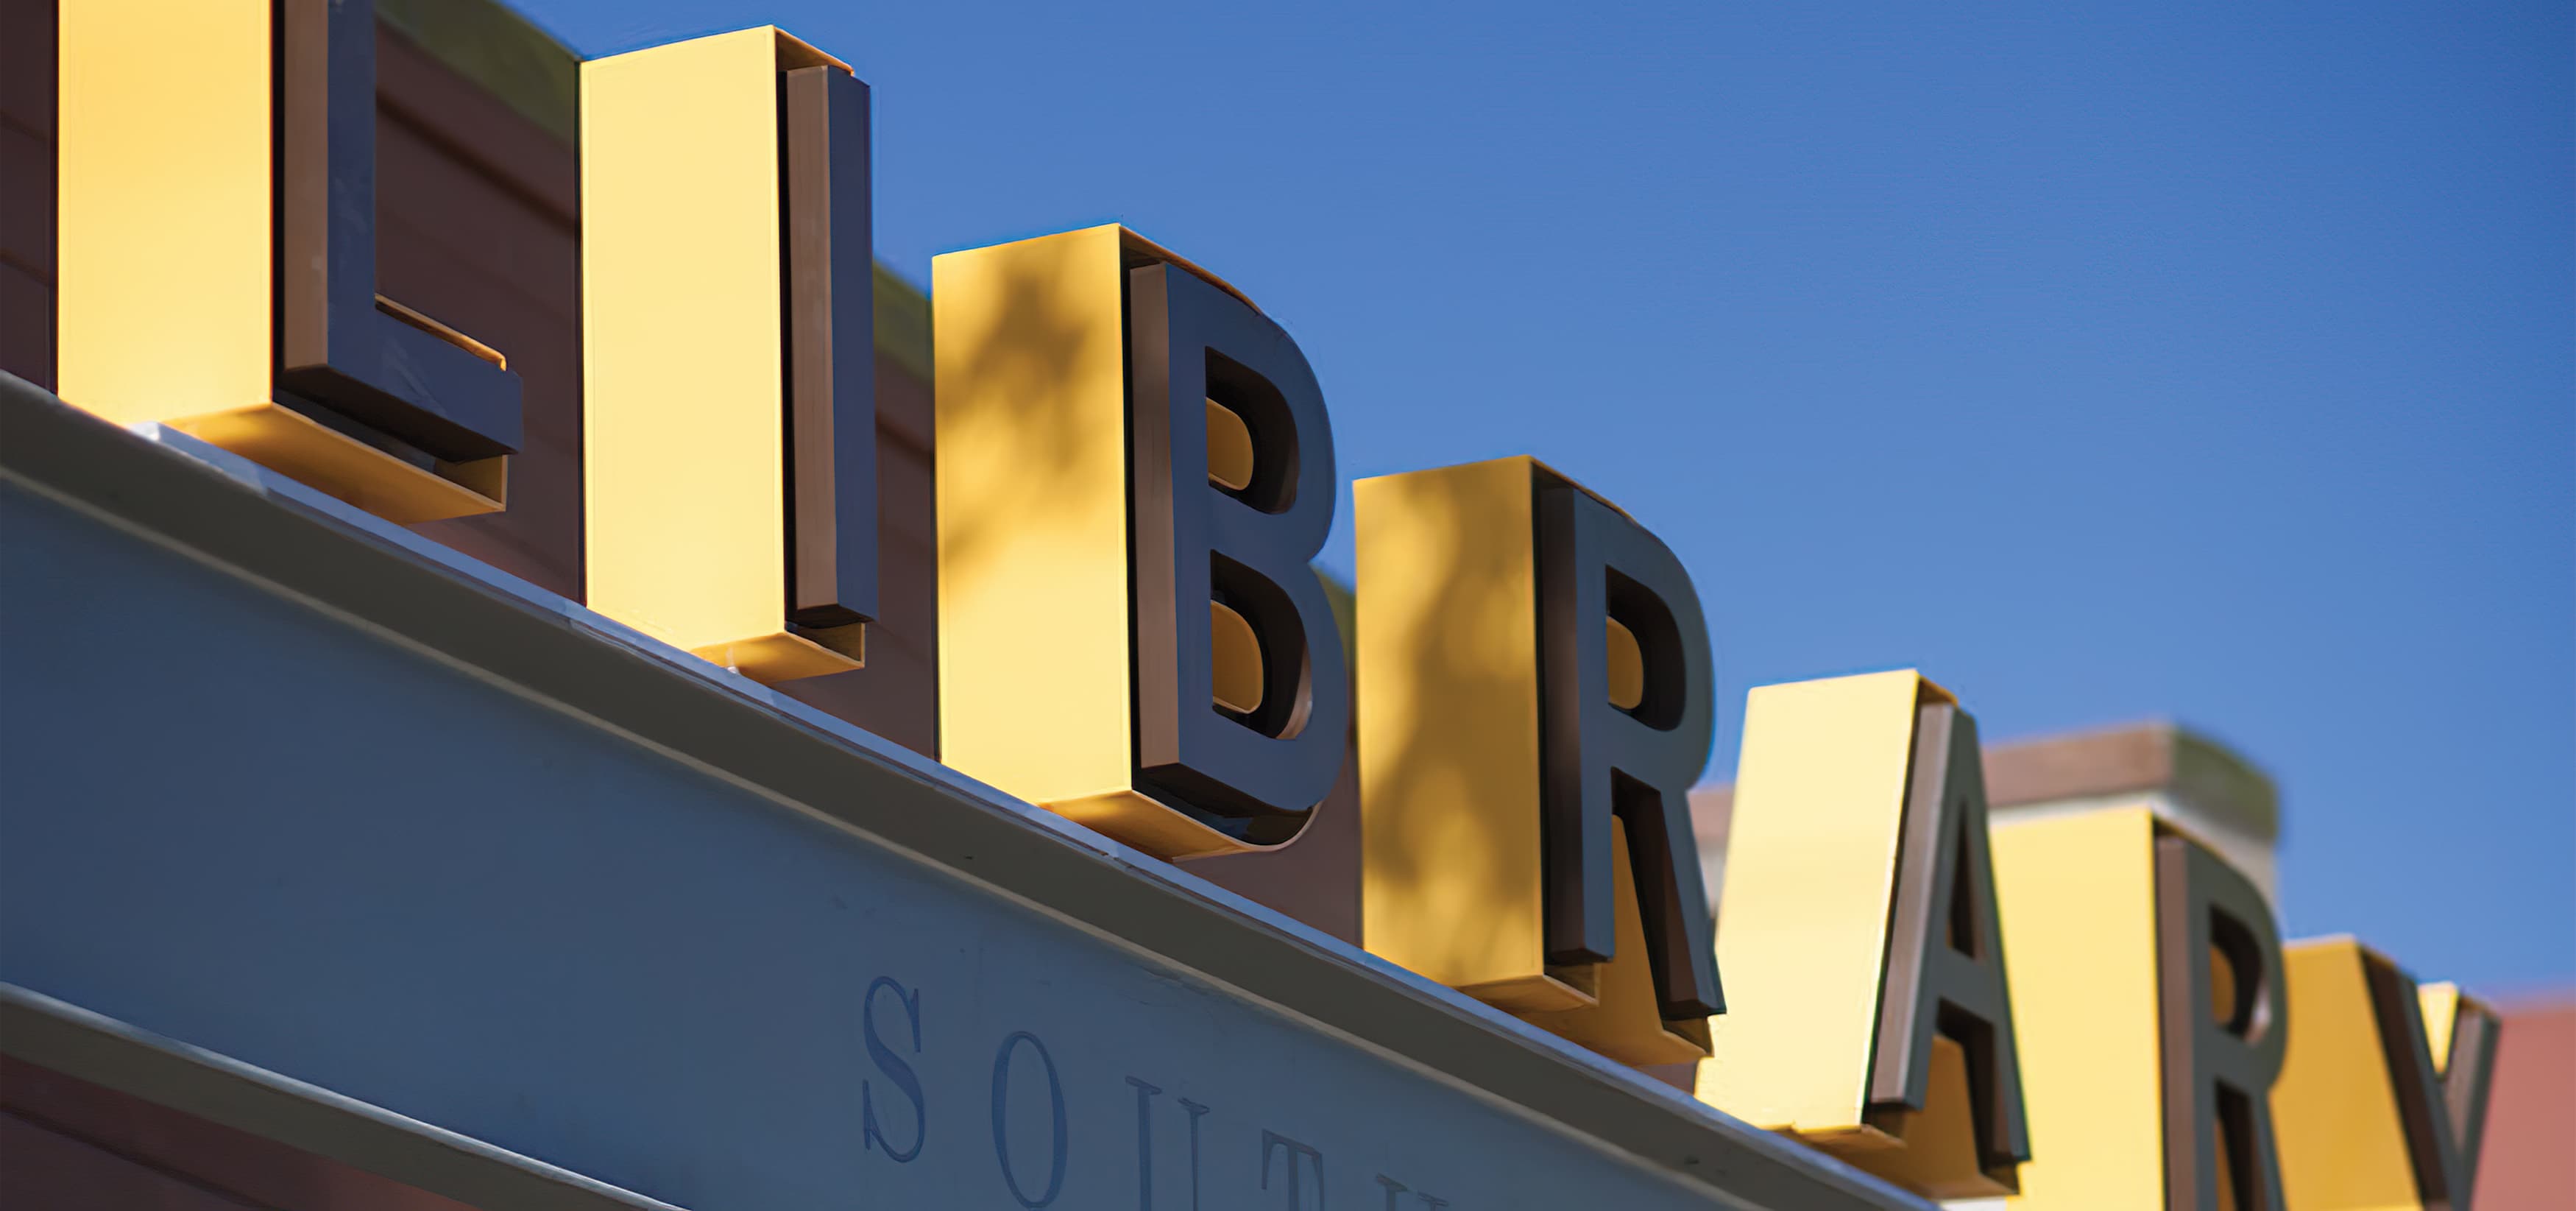 Berkeley Public Library South Branch. Our team developed a friendly and informative system of signage and placemaking elements in both the interior and exterior, our scope included identity and wayfinding signage. Fascia Signage.